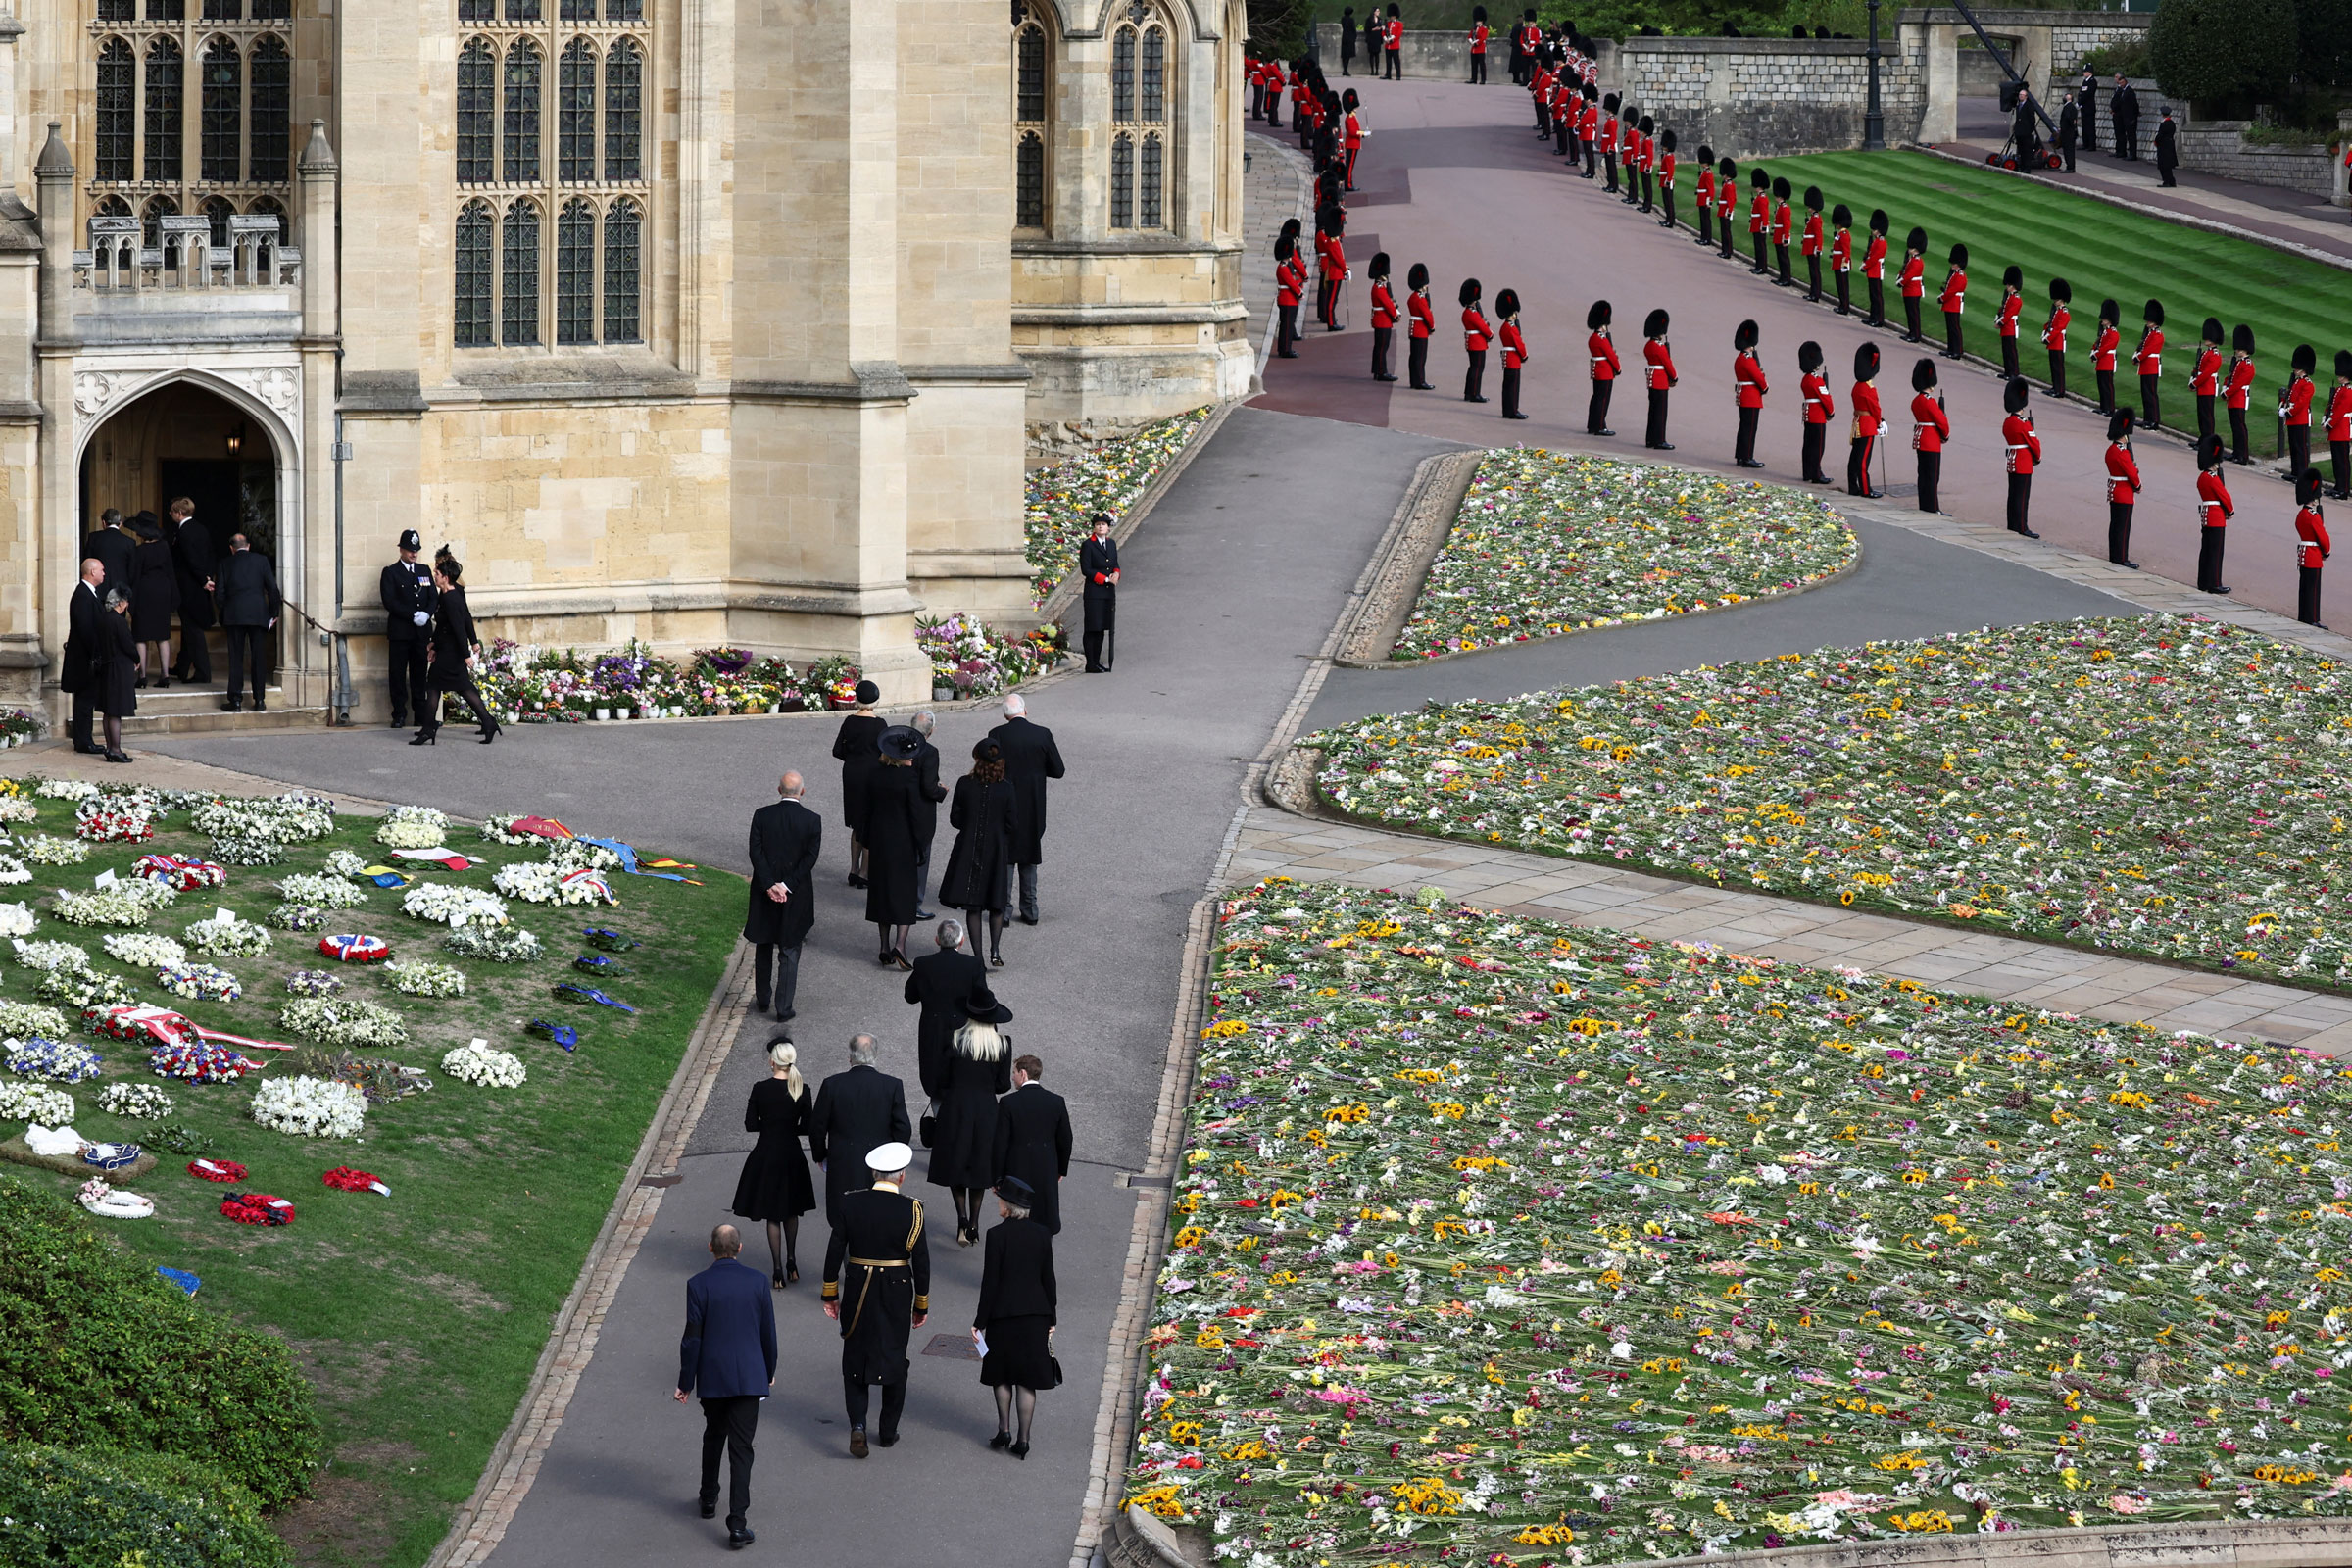 Guests arrive at St. George's Chapel at Windsor Castle, on the day of the state funeral and burial of Britain's Queen Elizabeth II. (Henry Nicholls—Pool/Reuters)